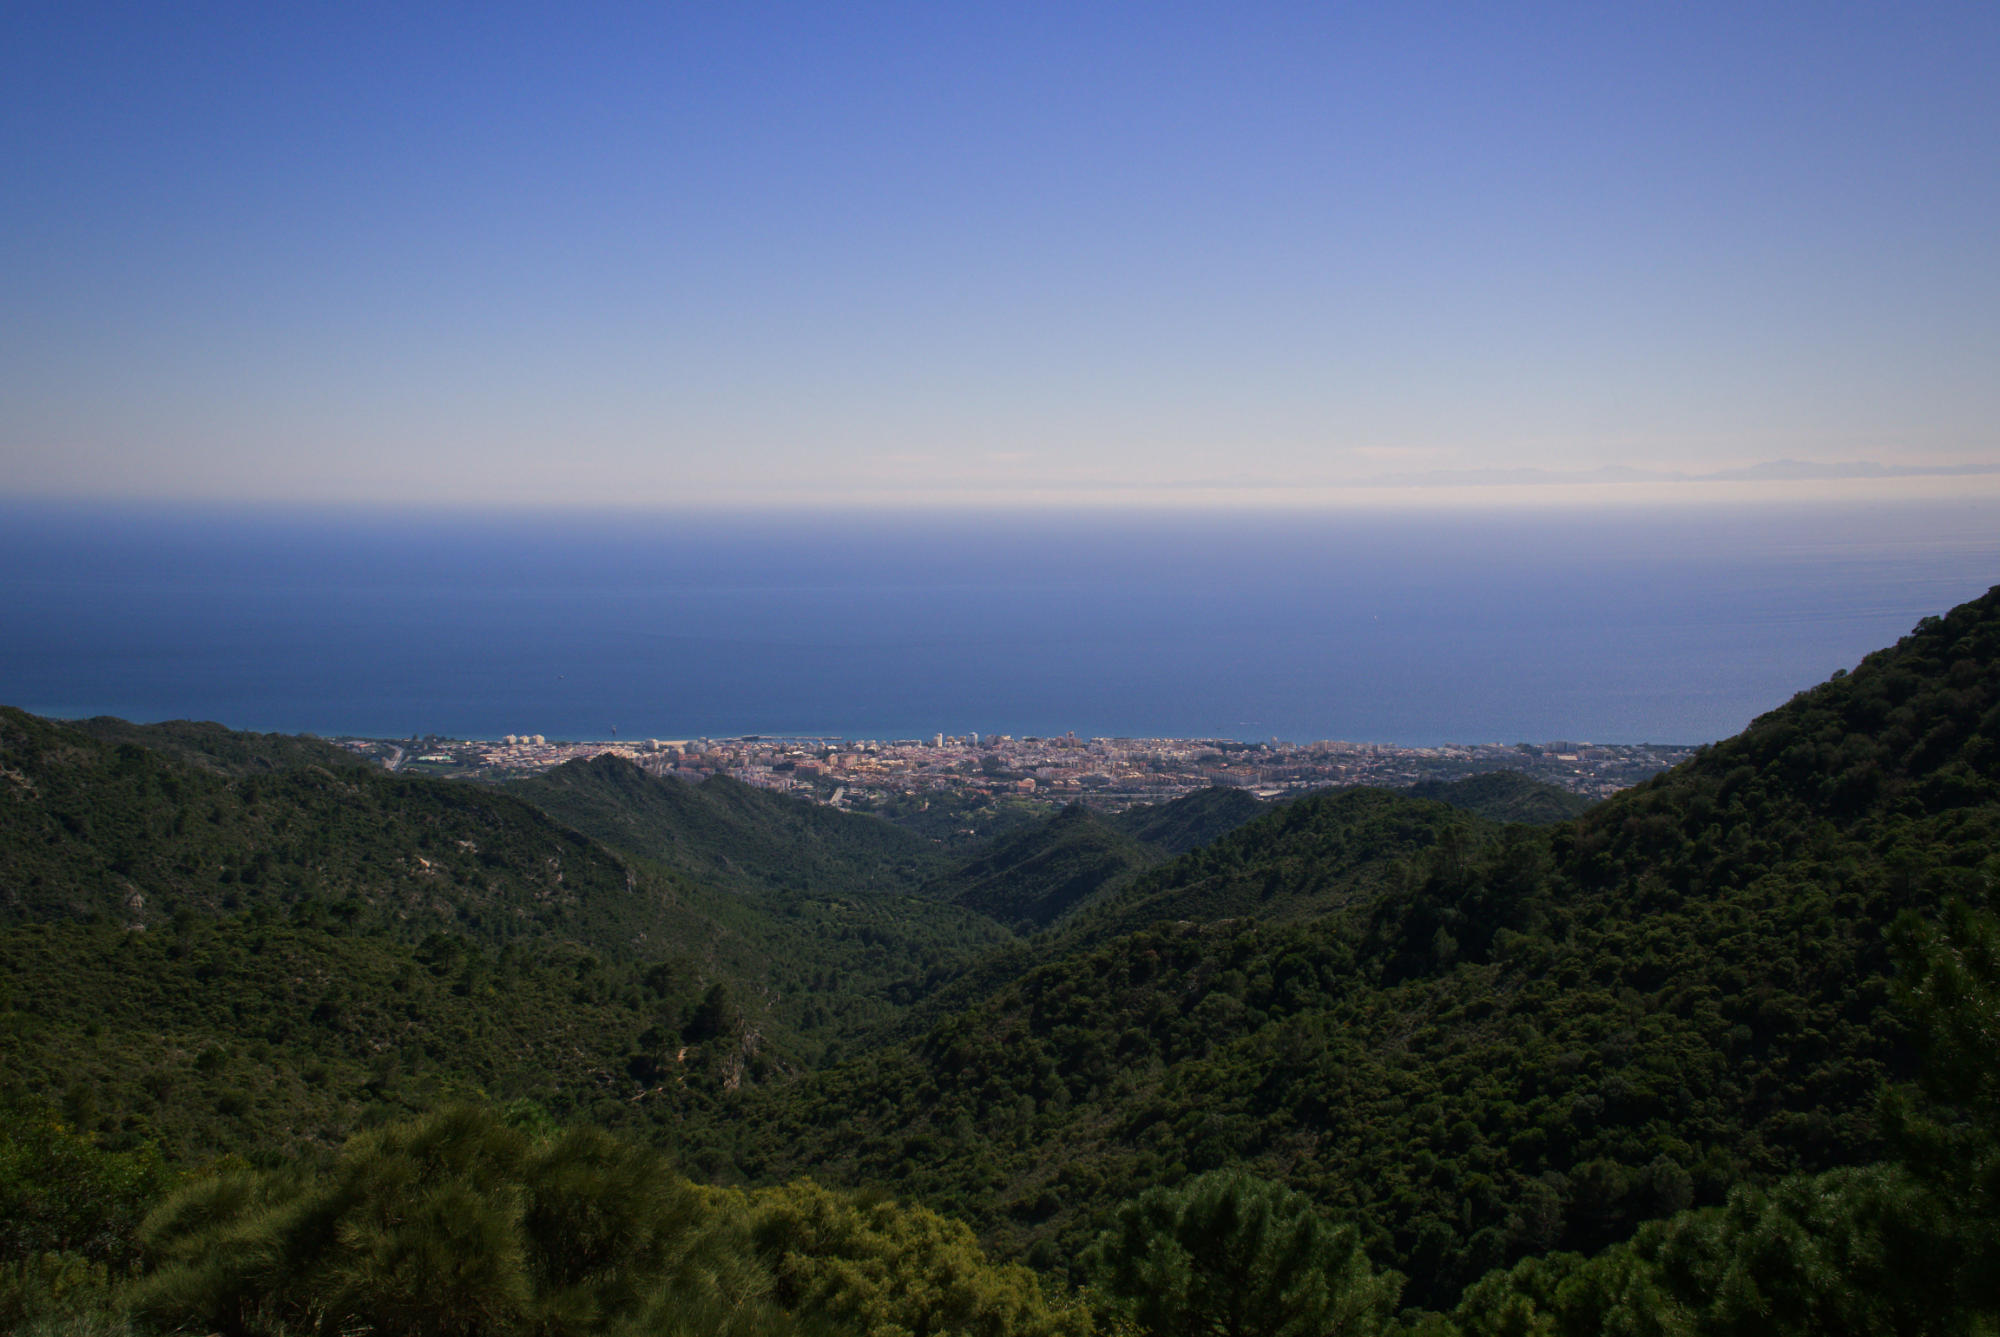 landscape view of forest covered mountains and hills stretching to the far-off ocean in the background